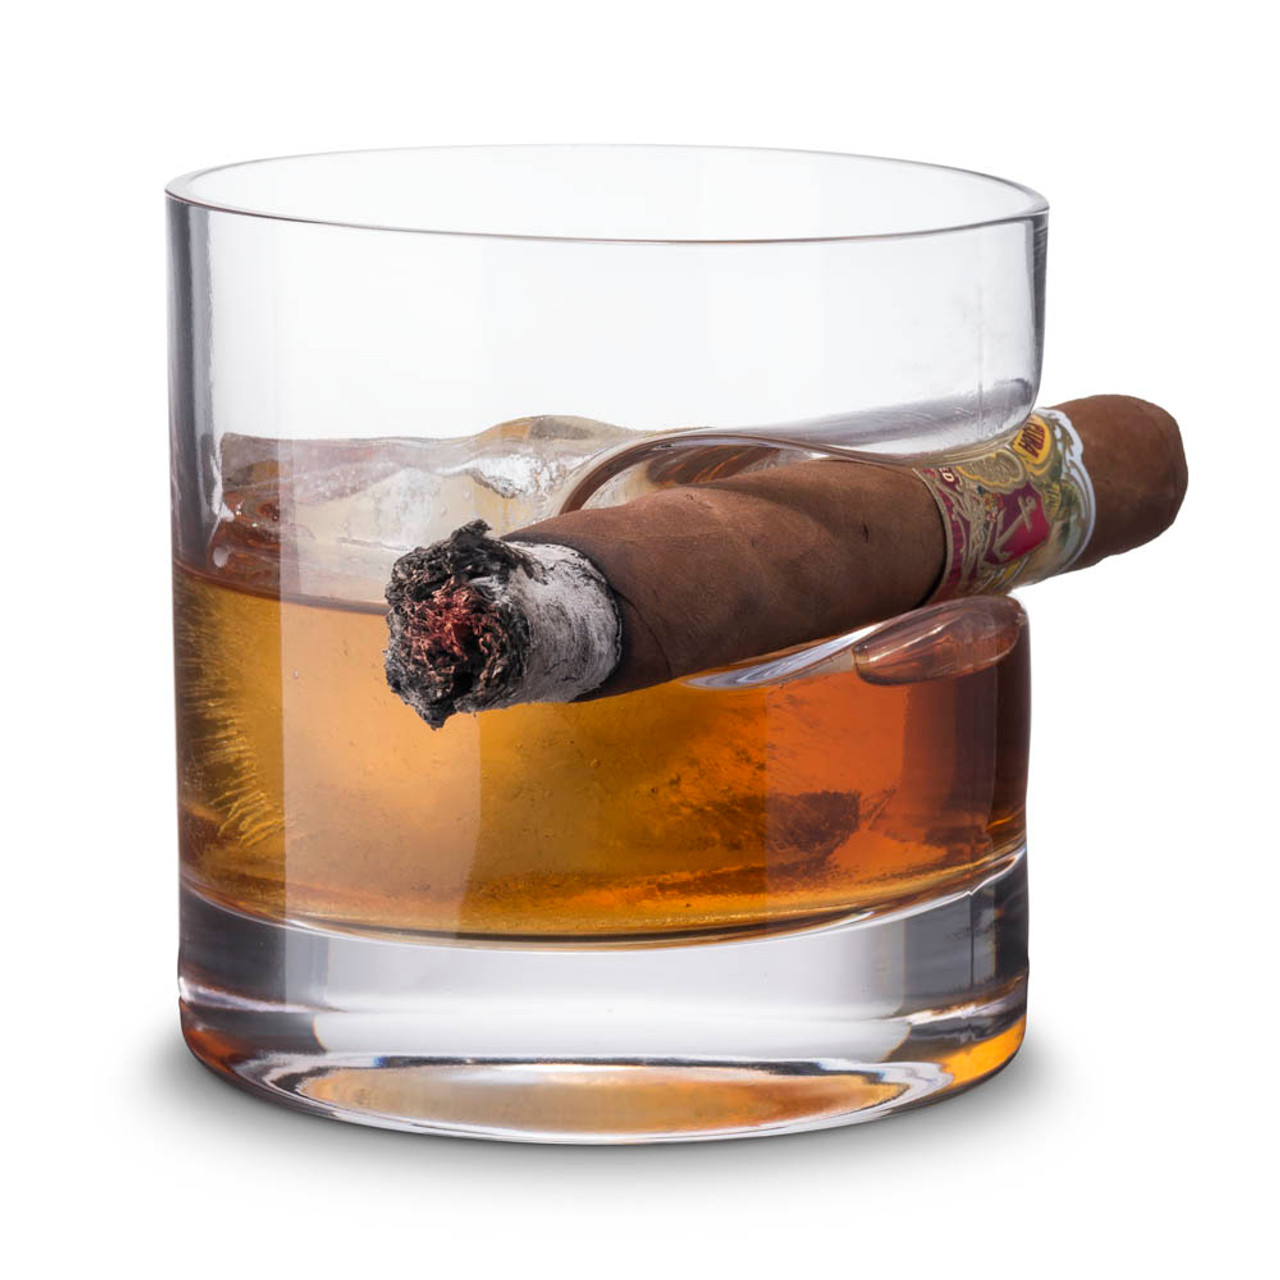 https://cdn11.bigcommerce.com/s-cznxq08r7/images/stencil/1280x1280/products/3500/10712/26089-Godinger-Cigar-Whiskey-Rocks-Glass-12-oz-With-Indented-Cigar-Rest-01__99470.1592499157.jpg?c=1